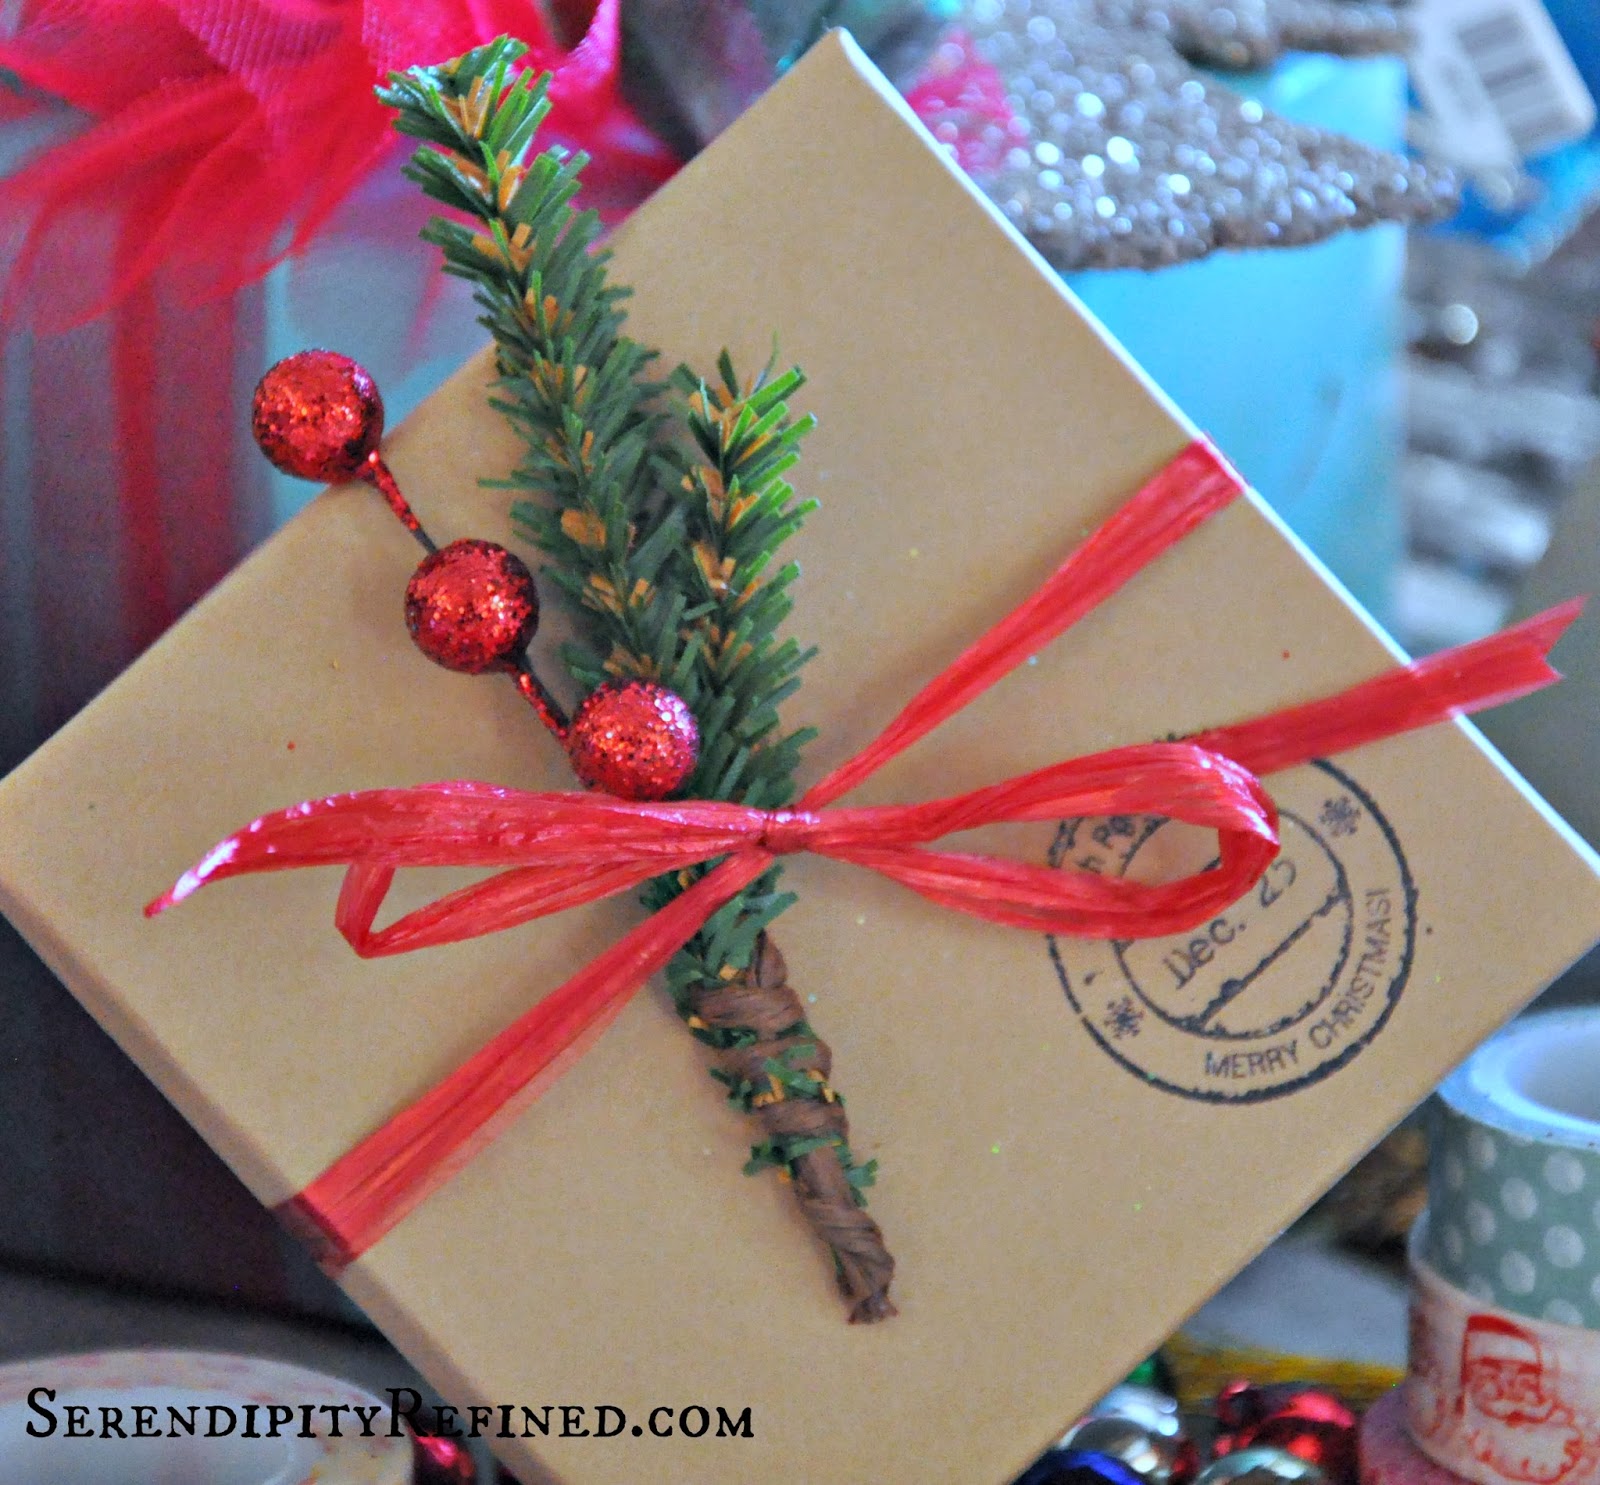 Serendipity Refined Blog: Holiday Gift Tags and Bows: Serendipity ...